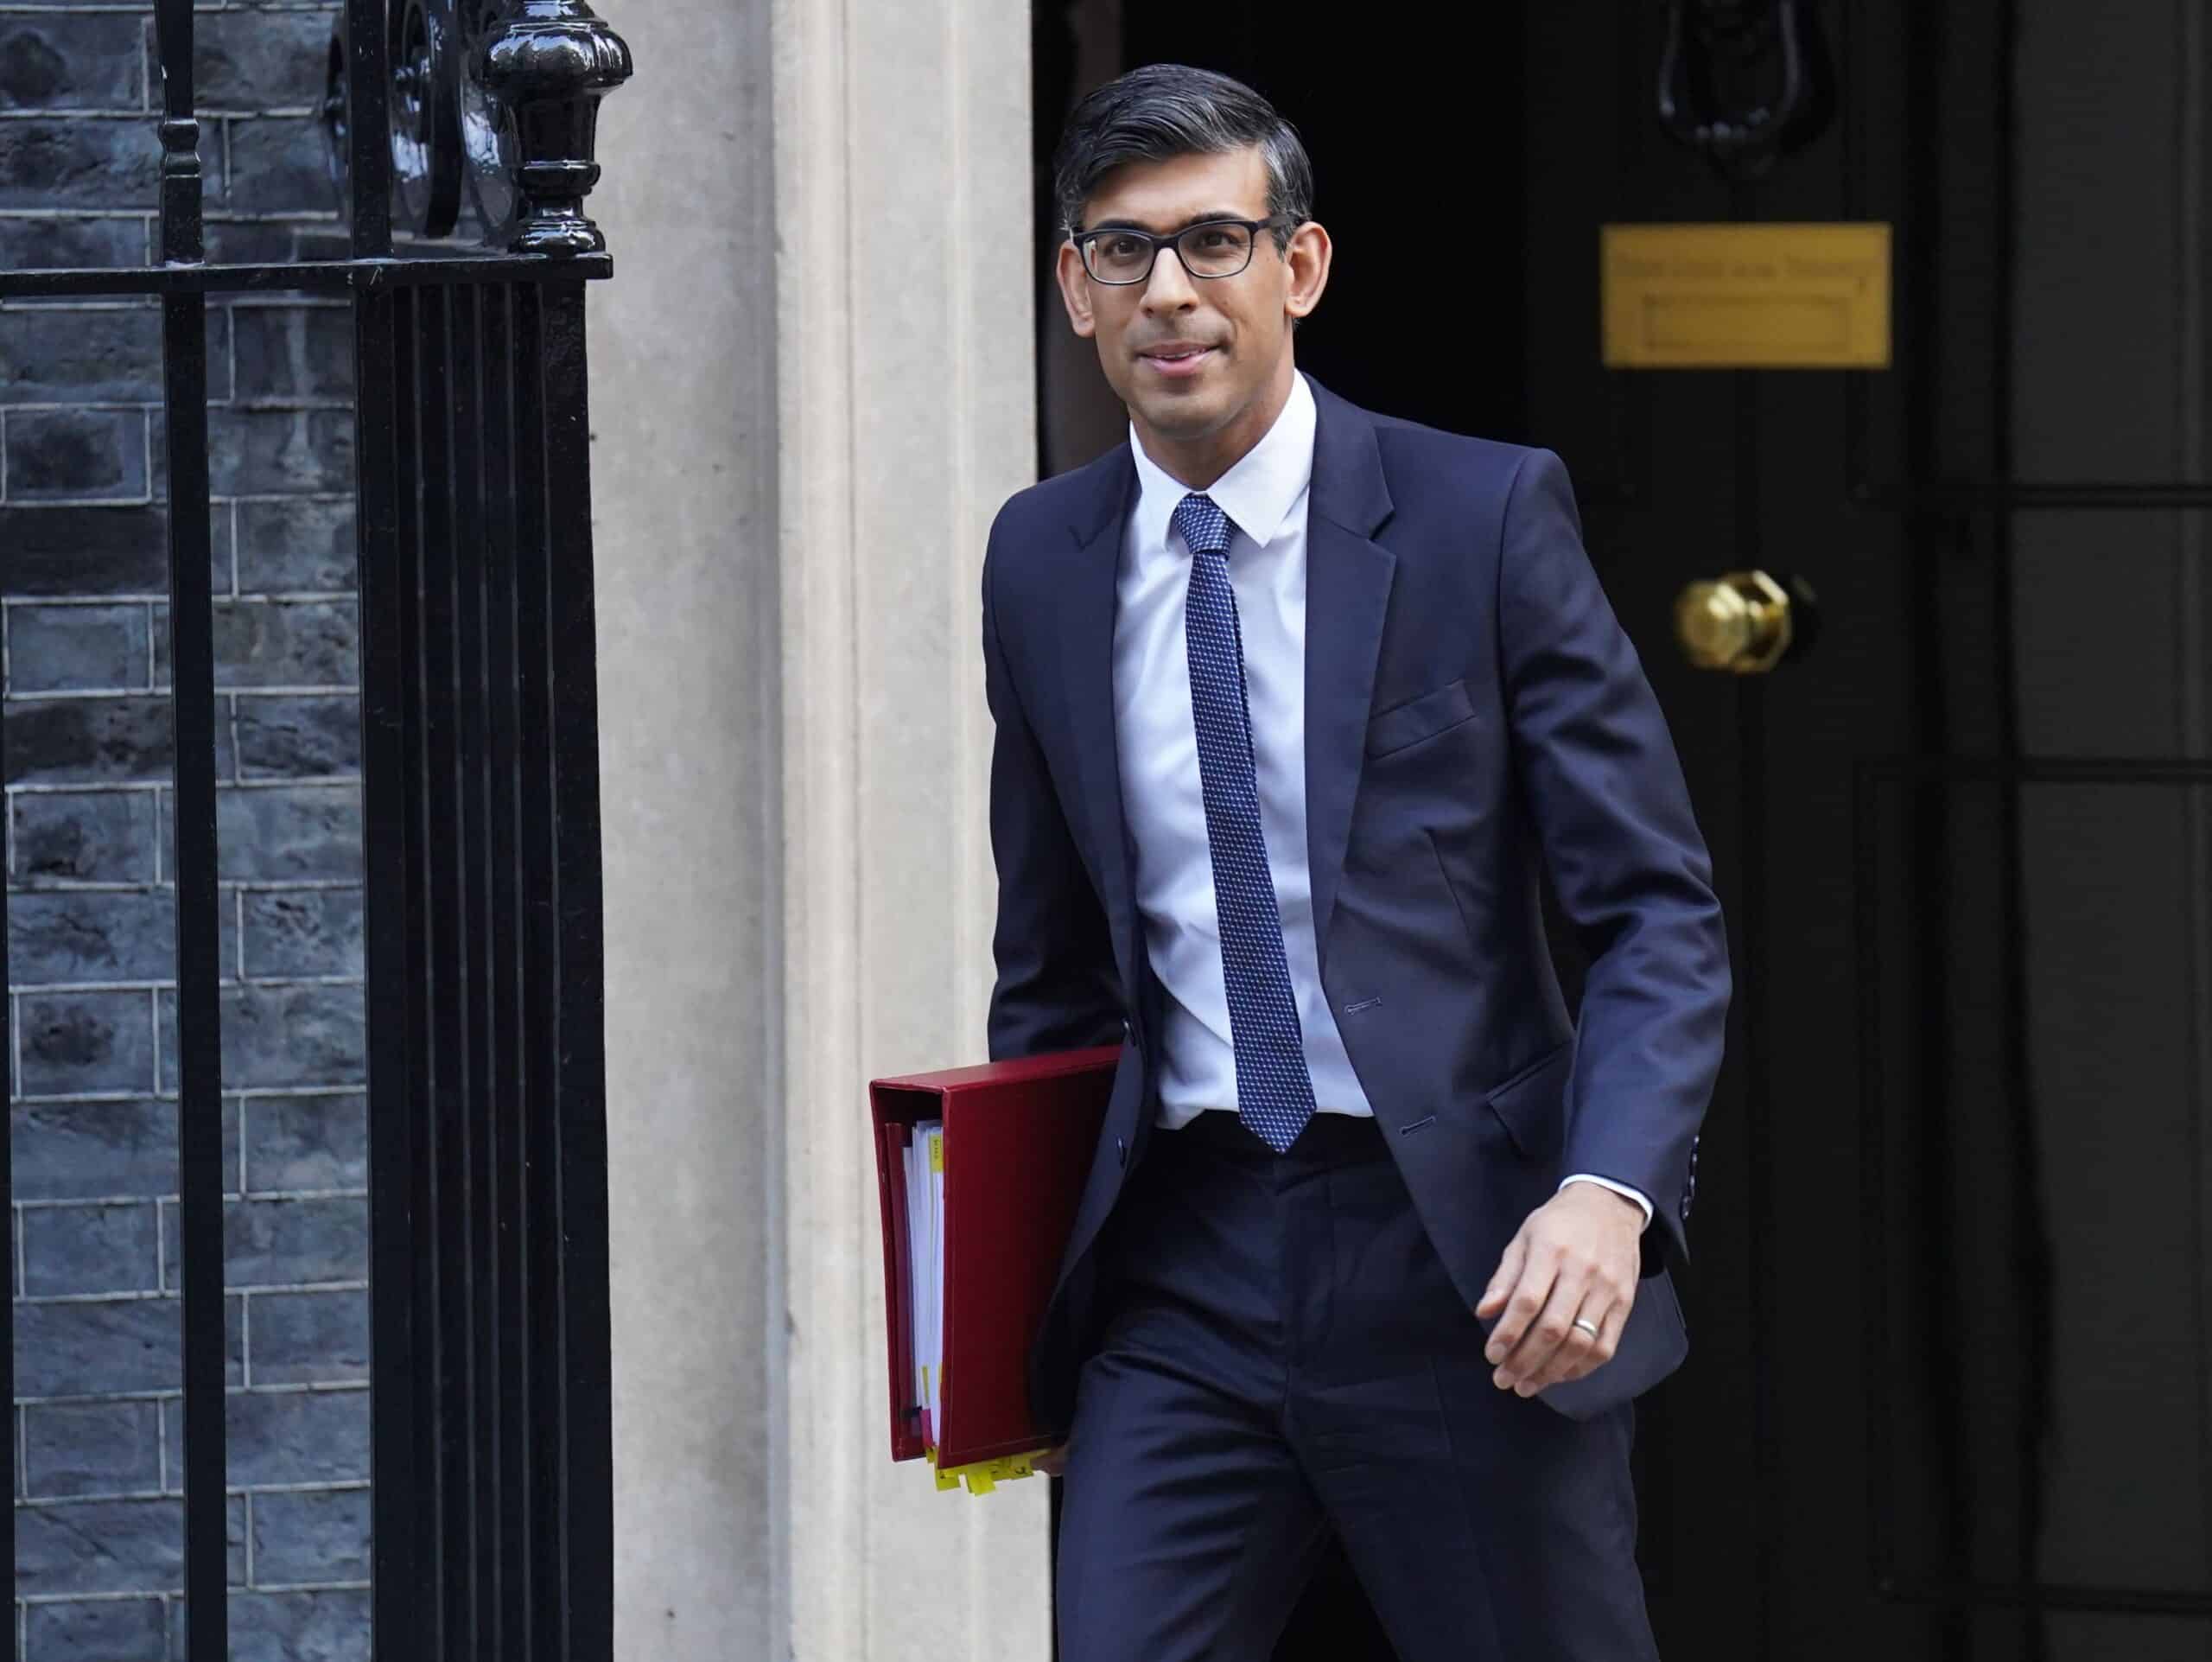 One Frazer, one foe, one Hands, keep moving: Cabinet reshuffle confirmed